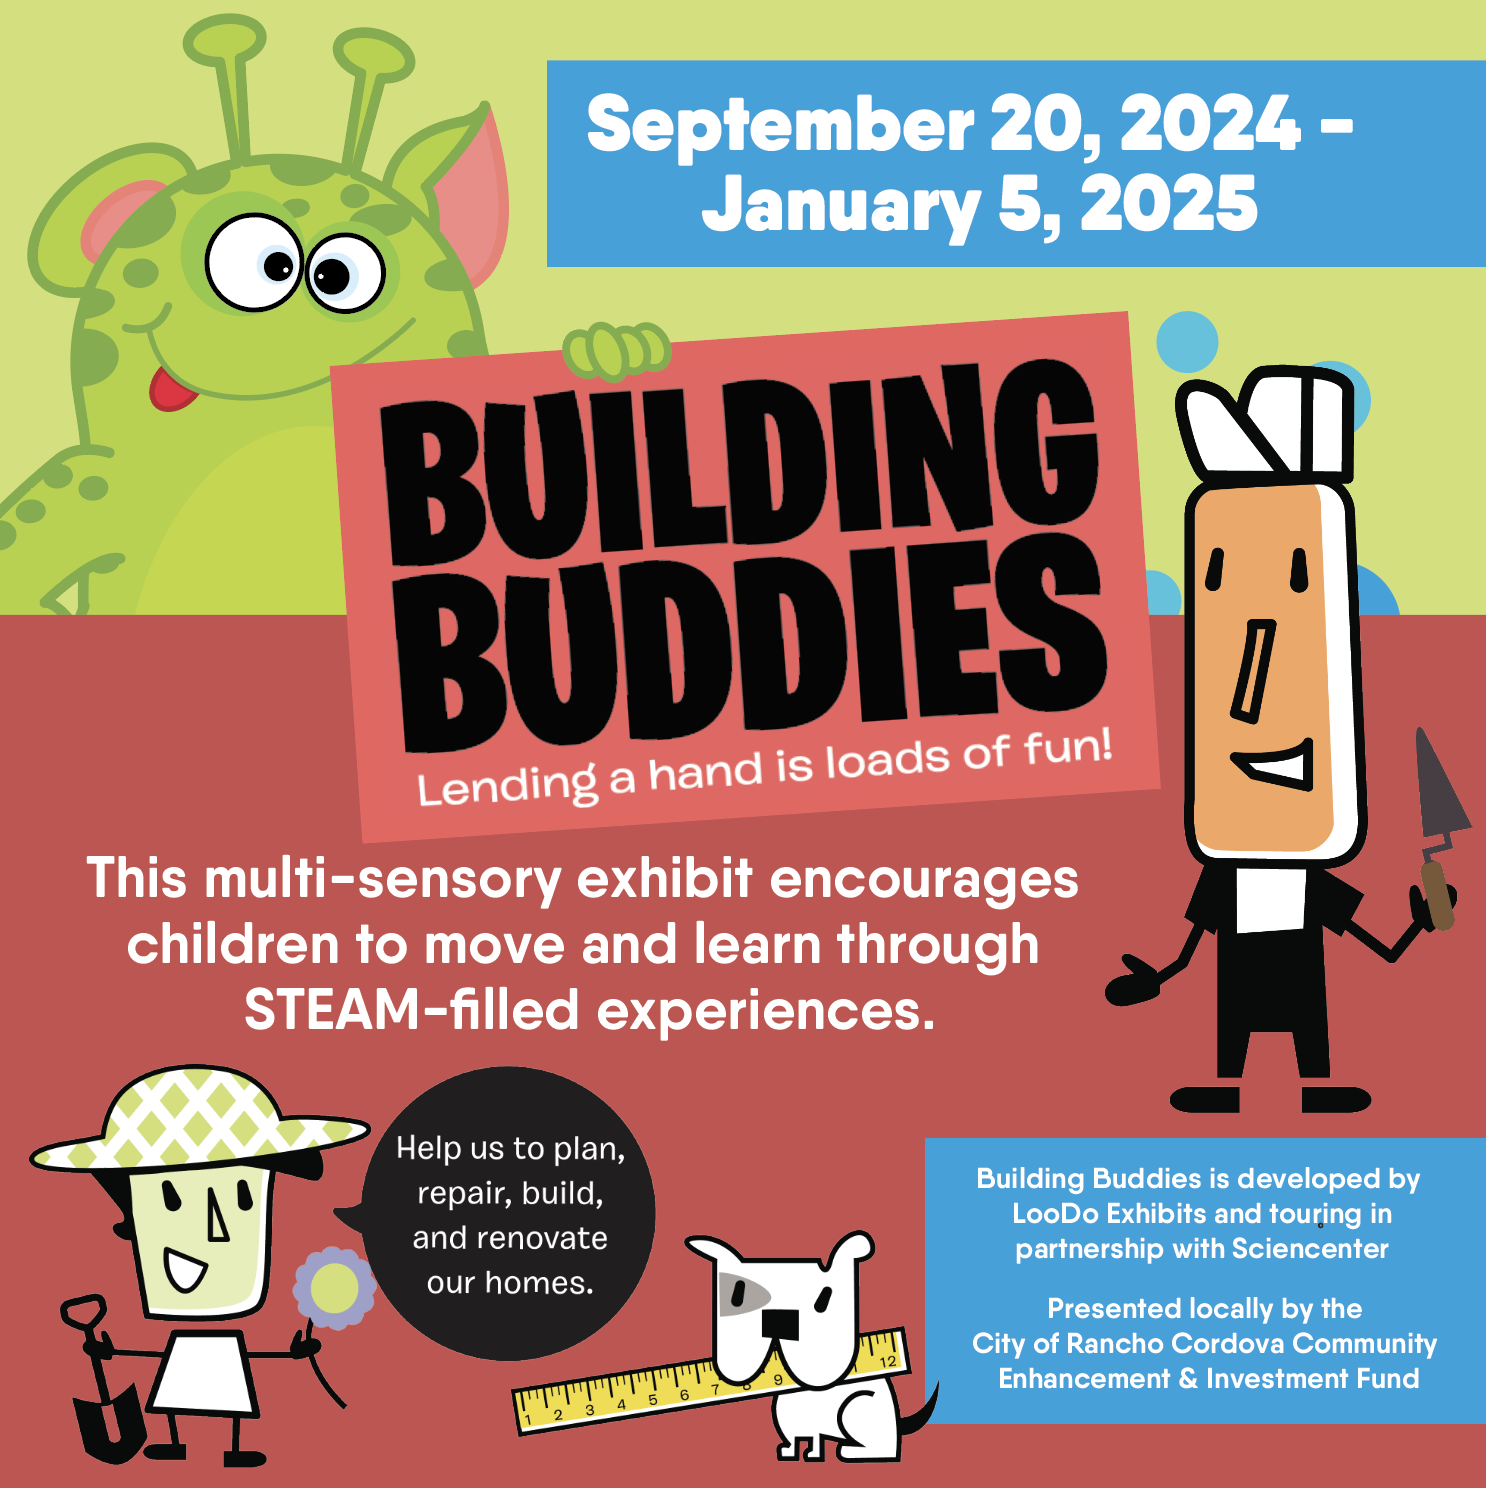 Building Buddies logo and text, exhibit running from september 20, 2024 to january 5, 2025